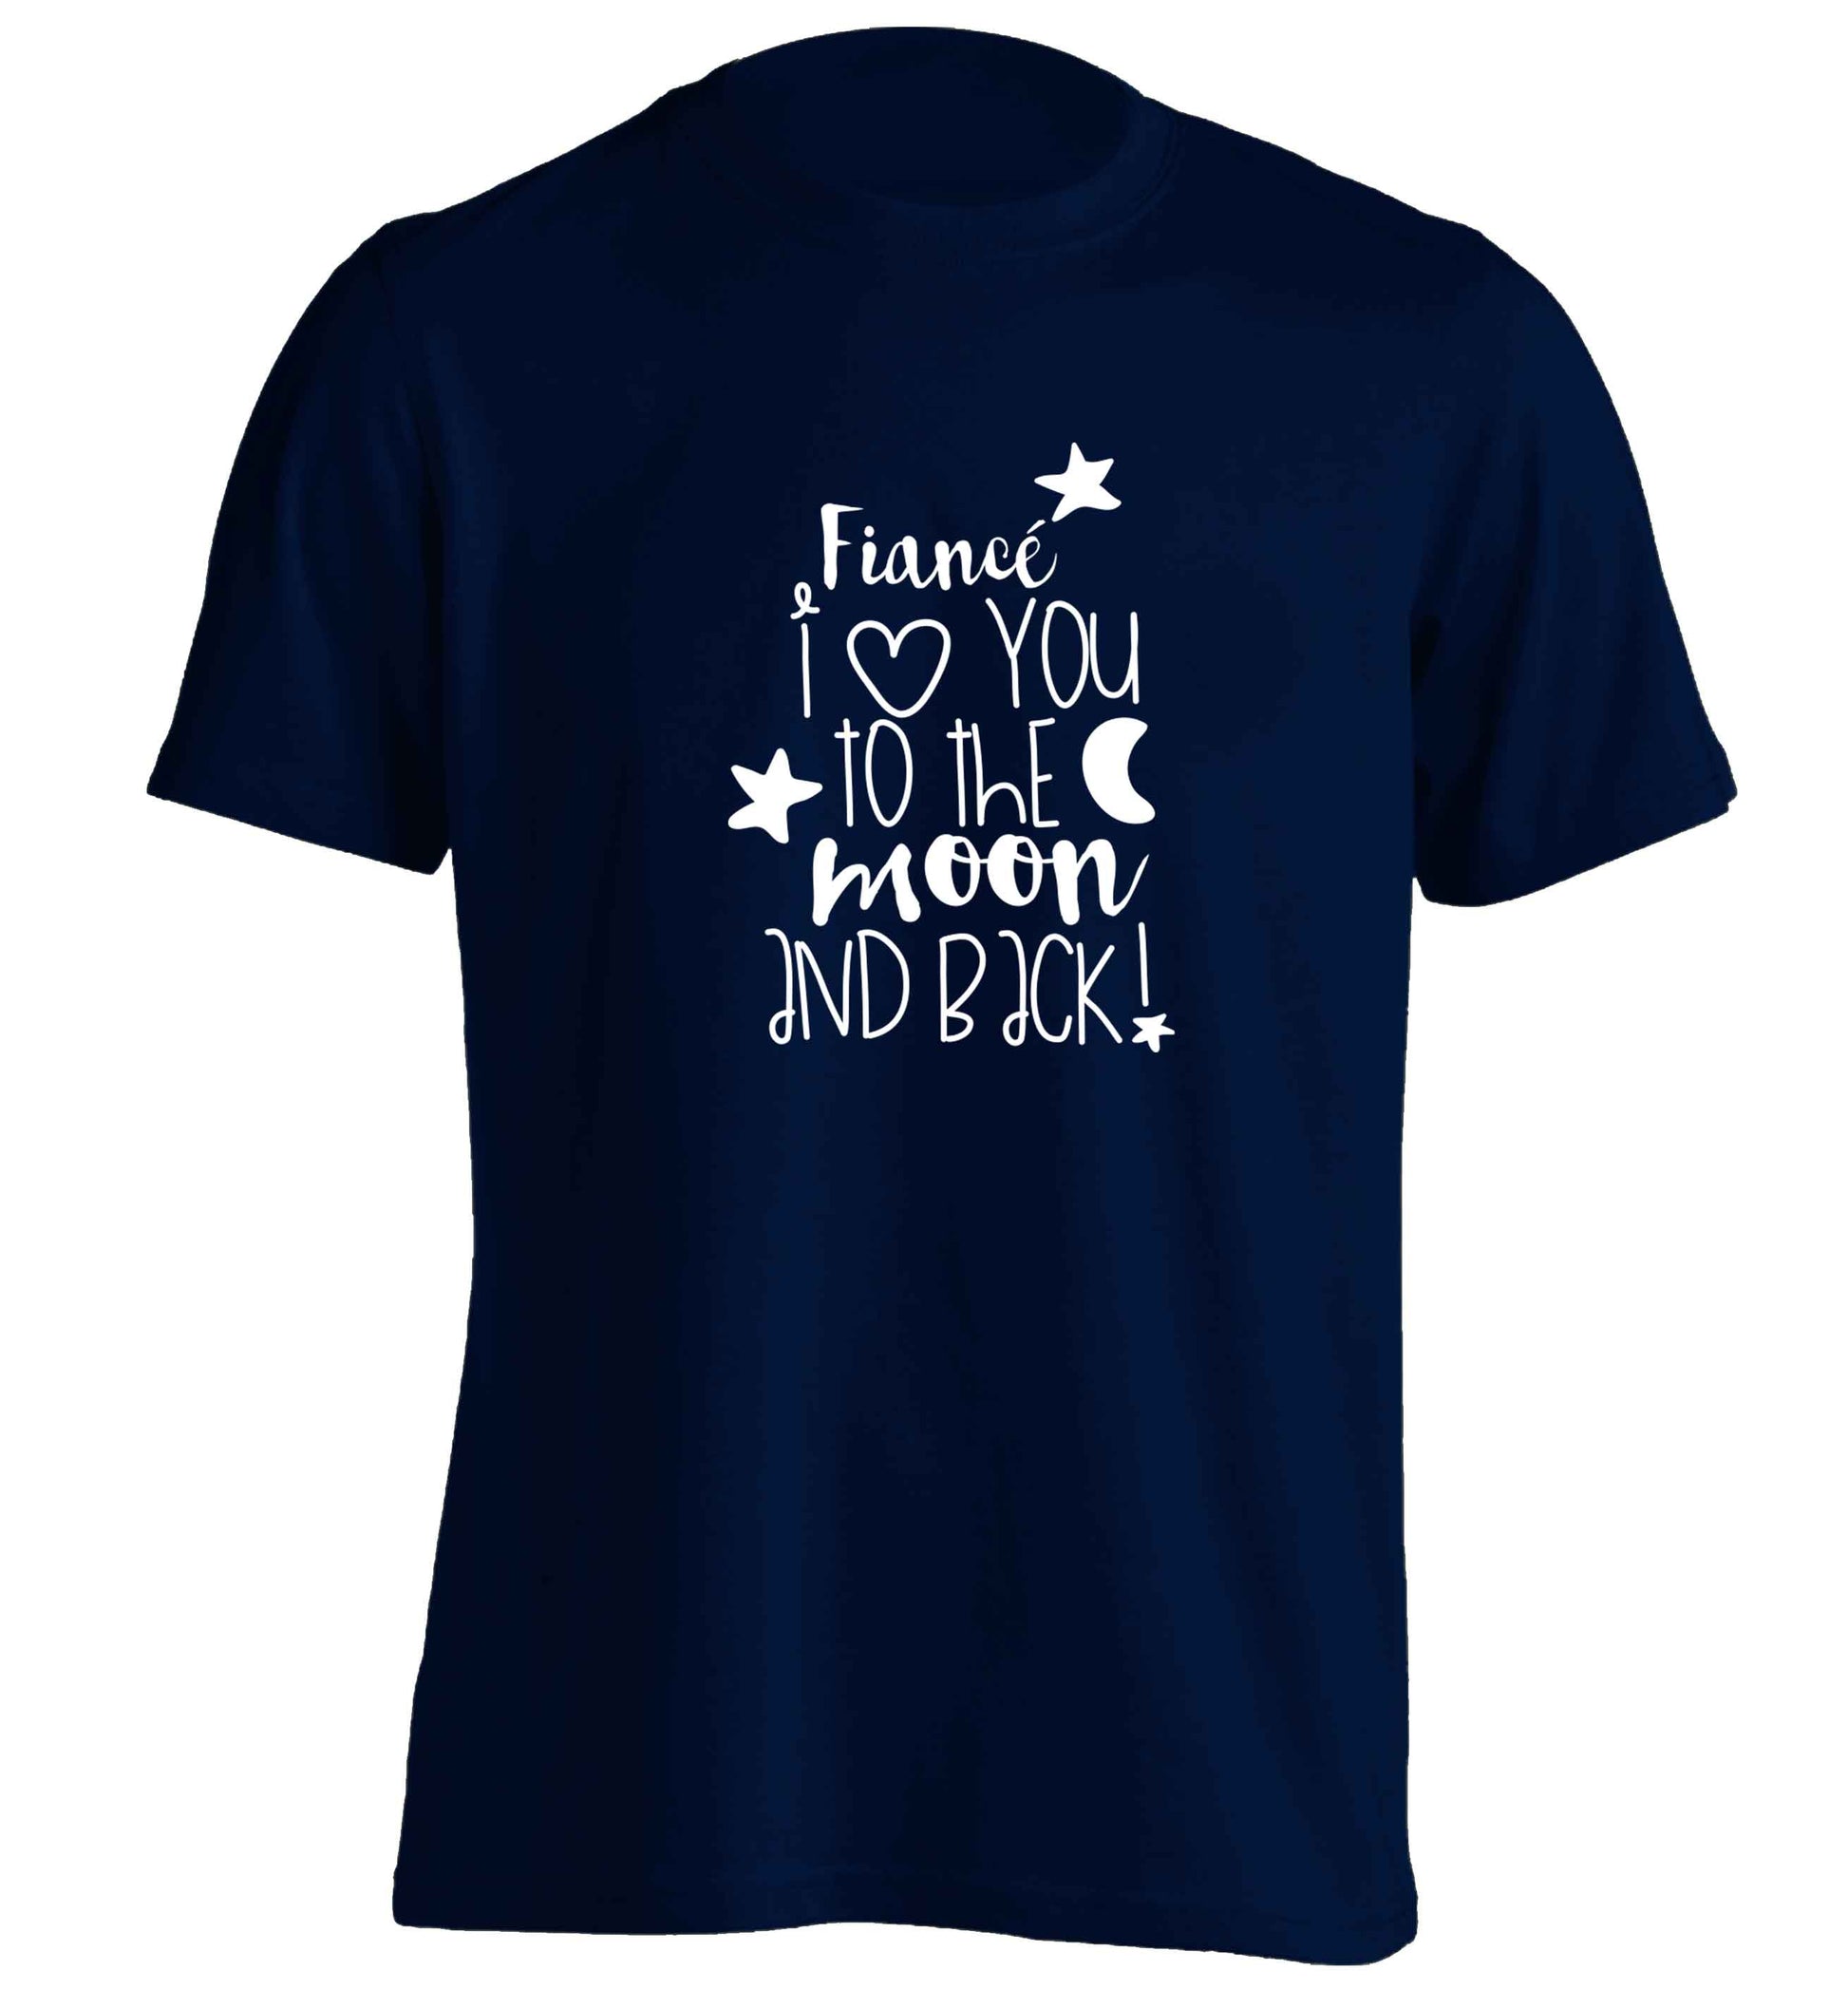 Fianc√© I love you to the moon and back adults unisex navy Tshirt 2XL